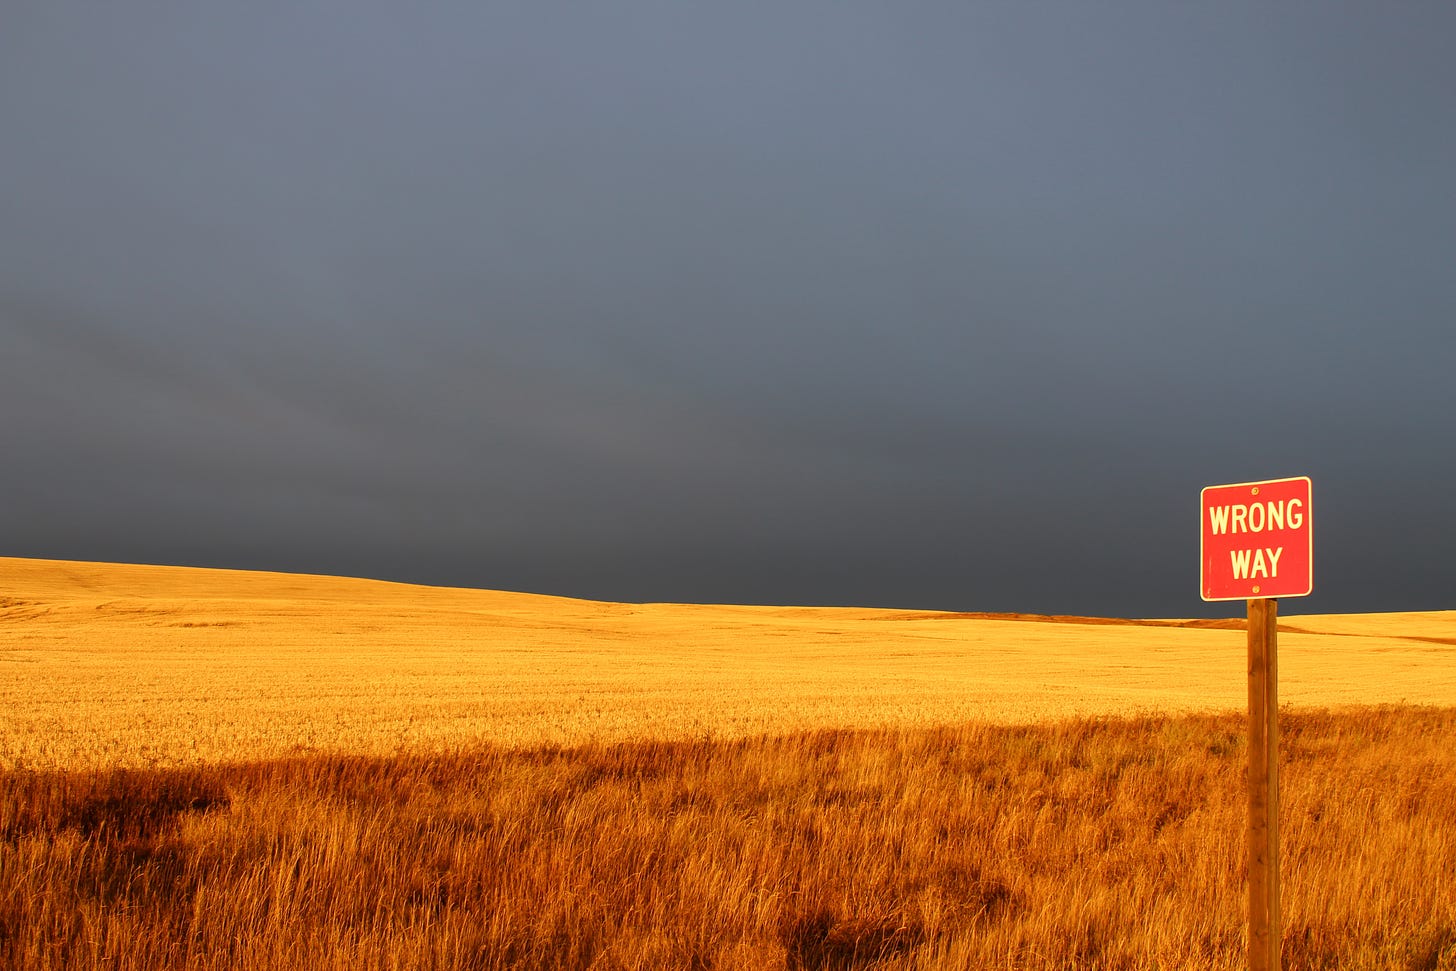 A sign reading "Wrong Way" sits in front of a wheat field against a dark blue-grey sky.